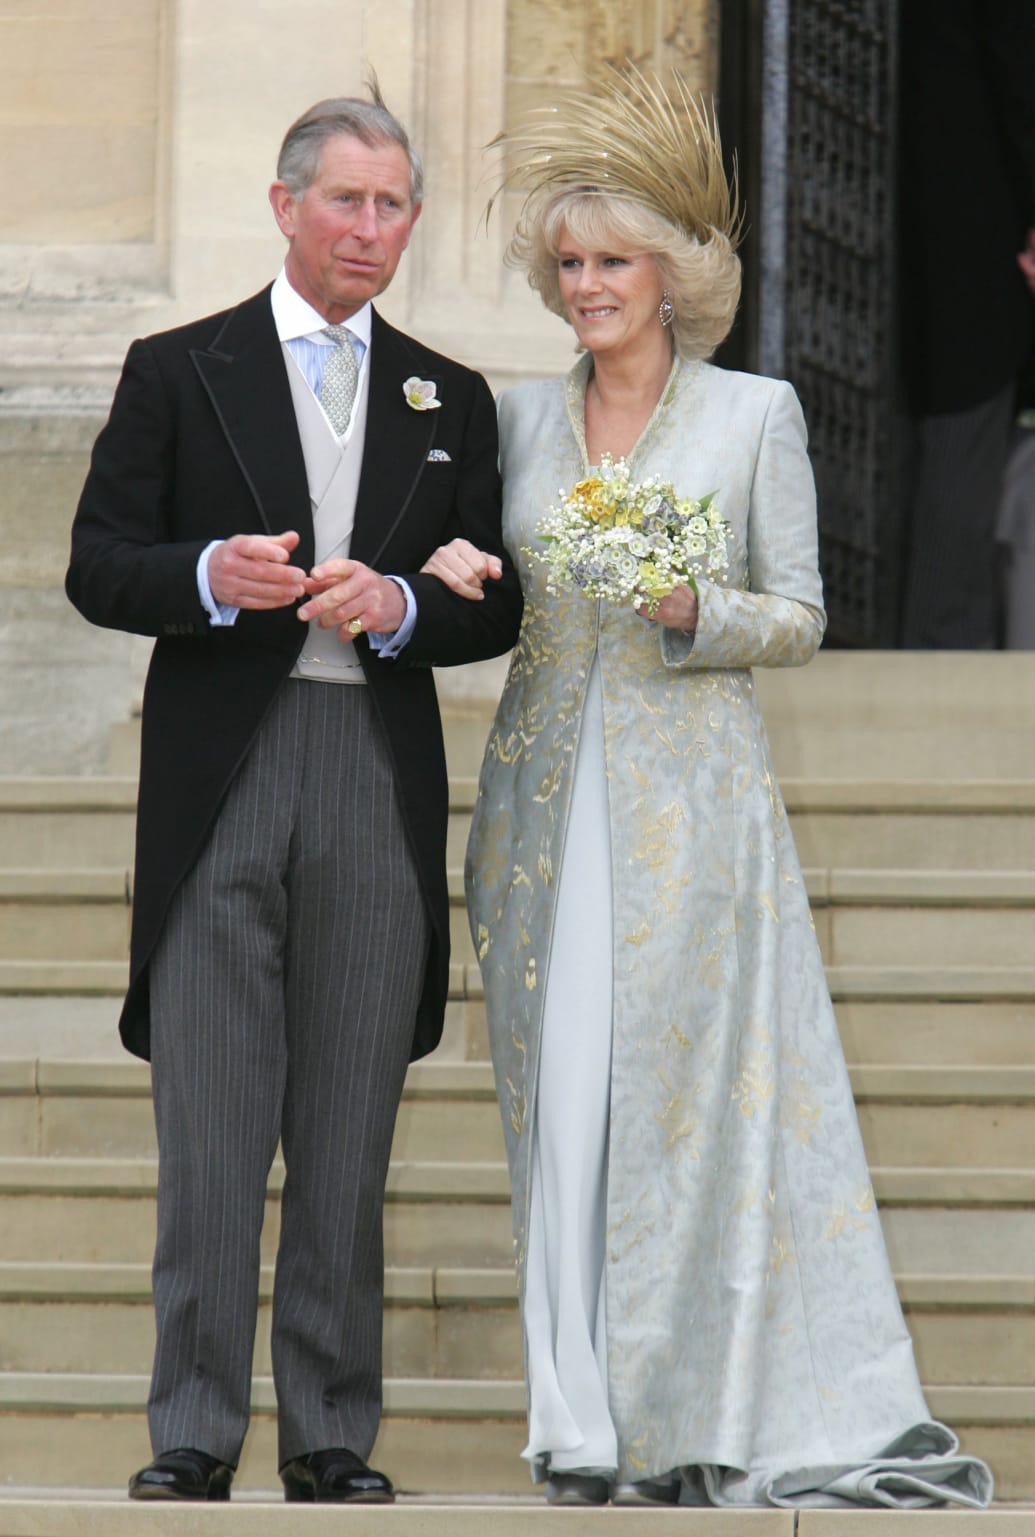 Britain's Prince Charles and Camilla, Duchess of Cornwall, pose outside St. George's Chapel in Windsor Castle, southern England, after the Service of Prayer and Dedication following their marriage, April 9, 2005.